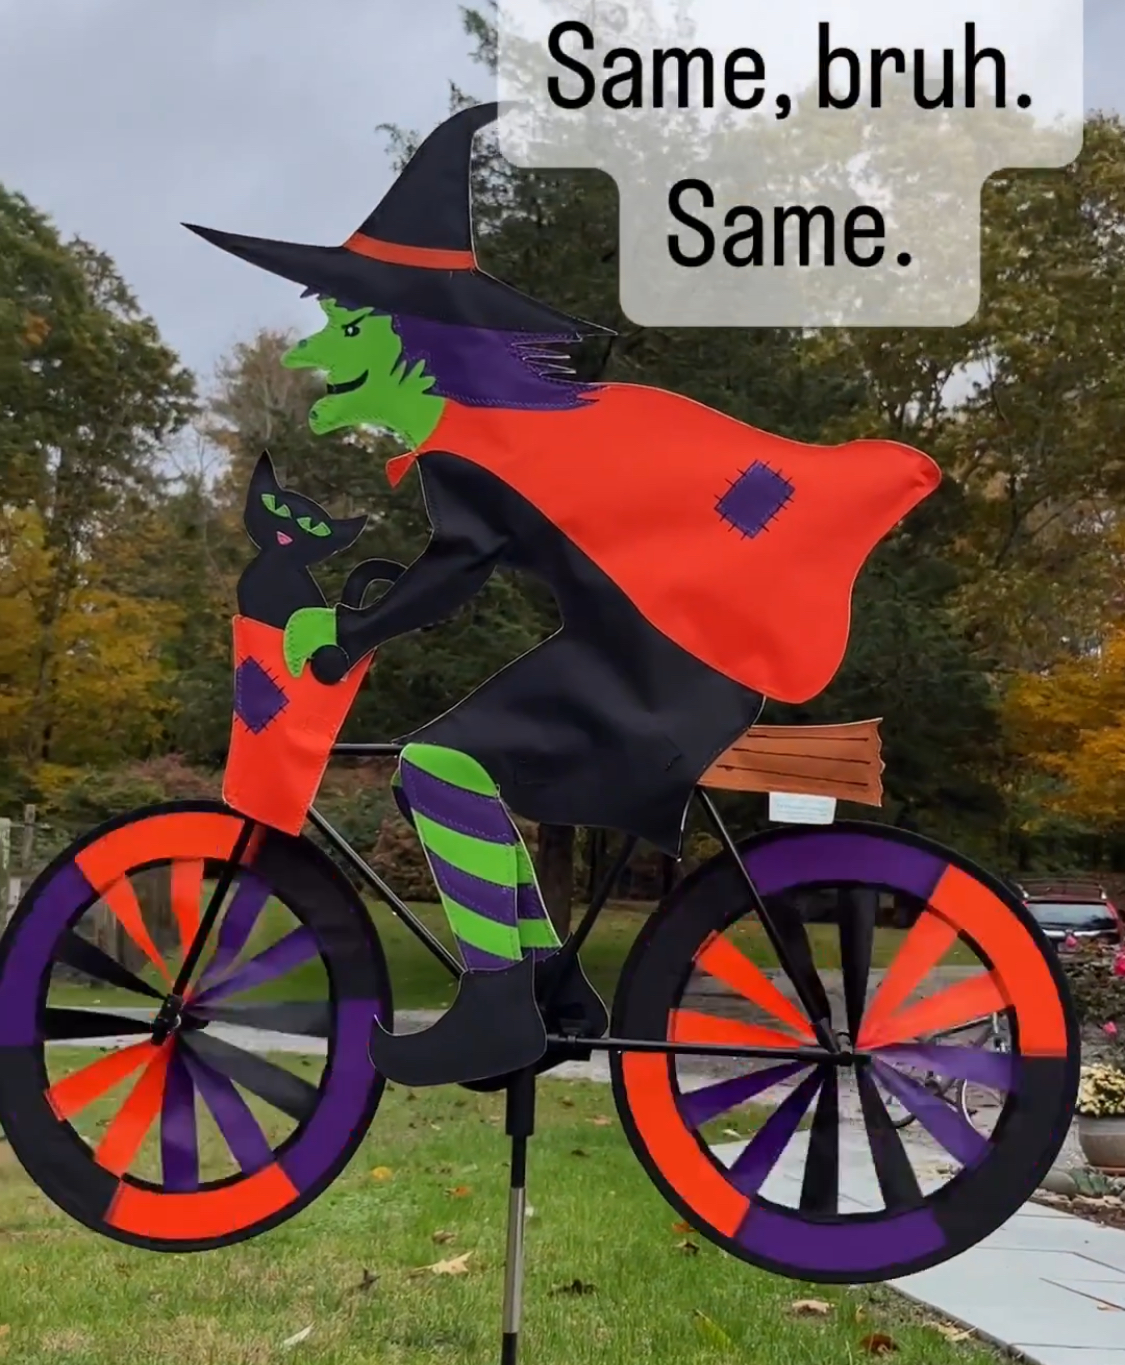 A yard sign of a Halloween witch on a bike, of which the wheels turn in the wind, making the witch seem to be riding the bike.